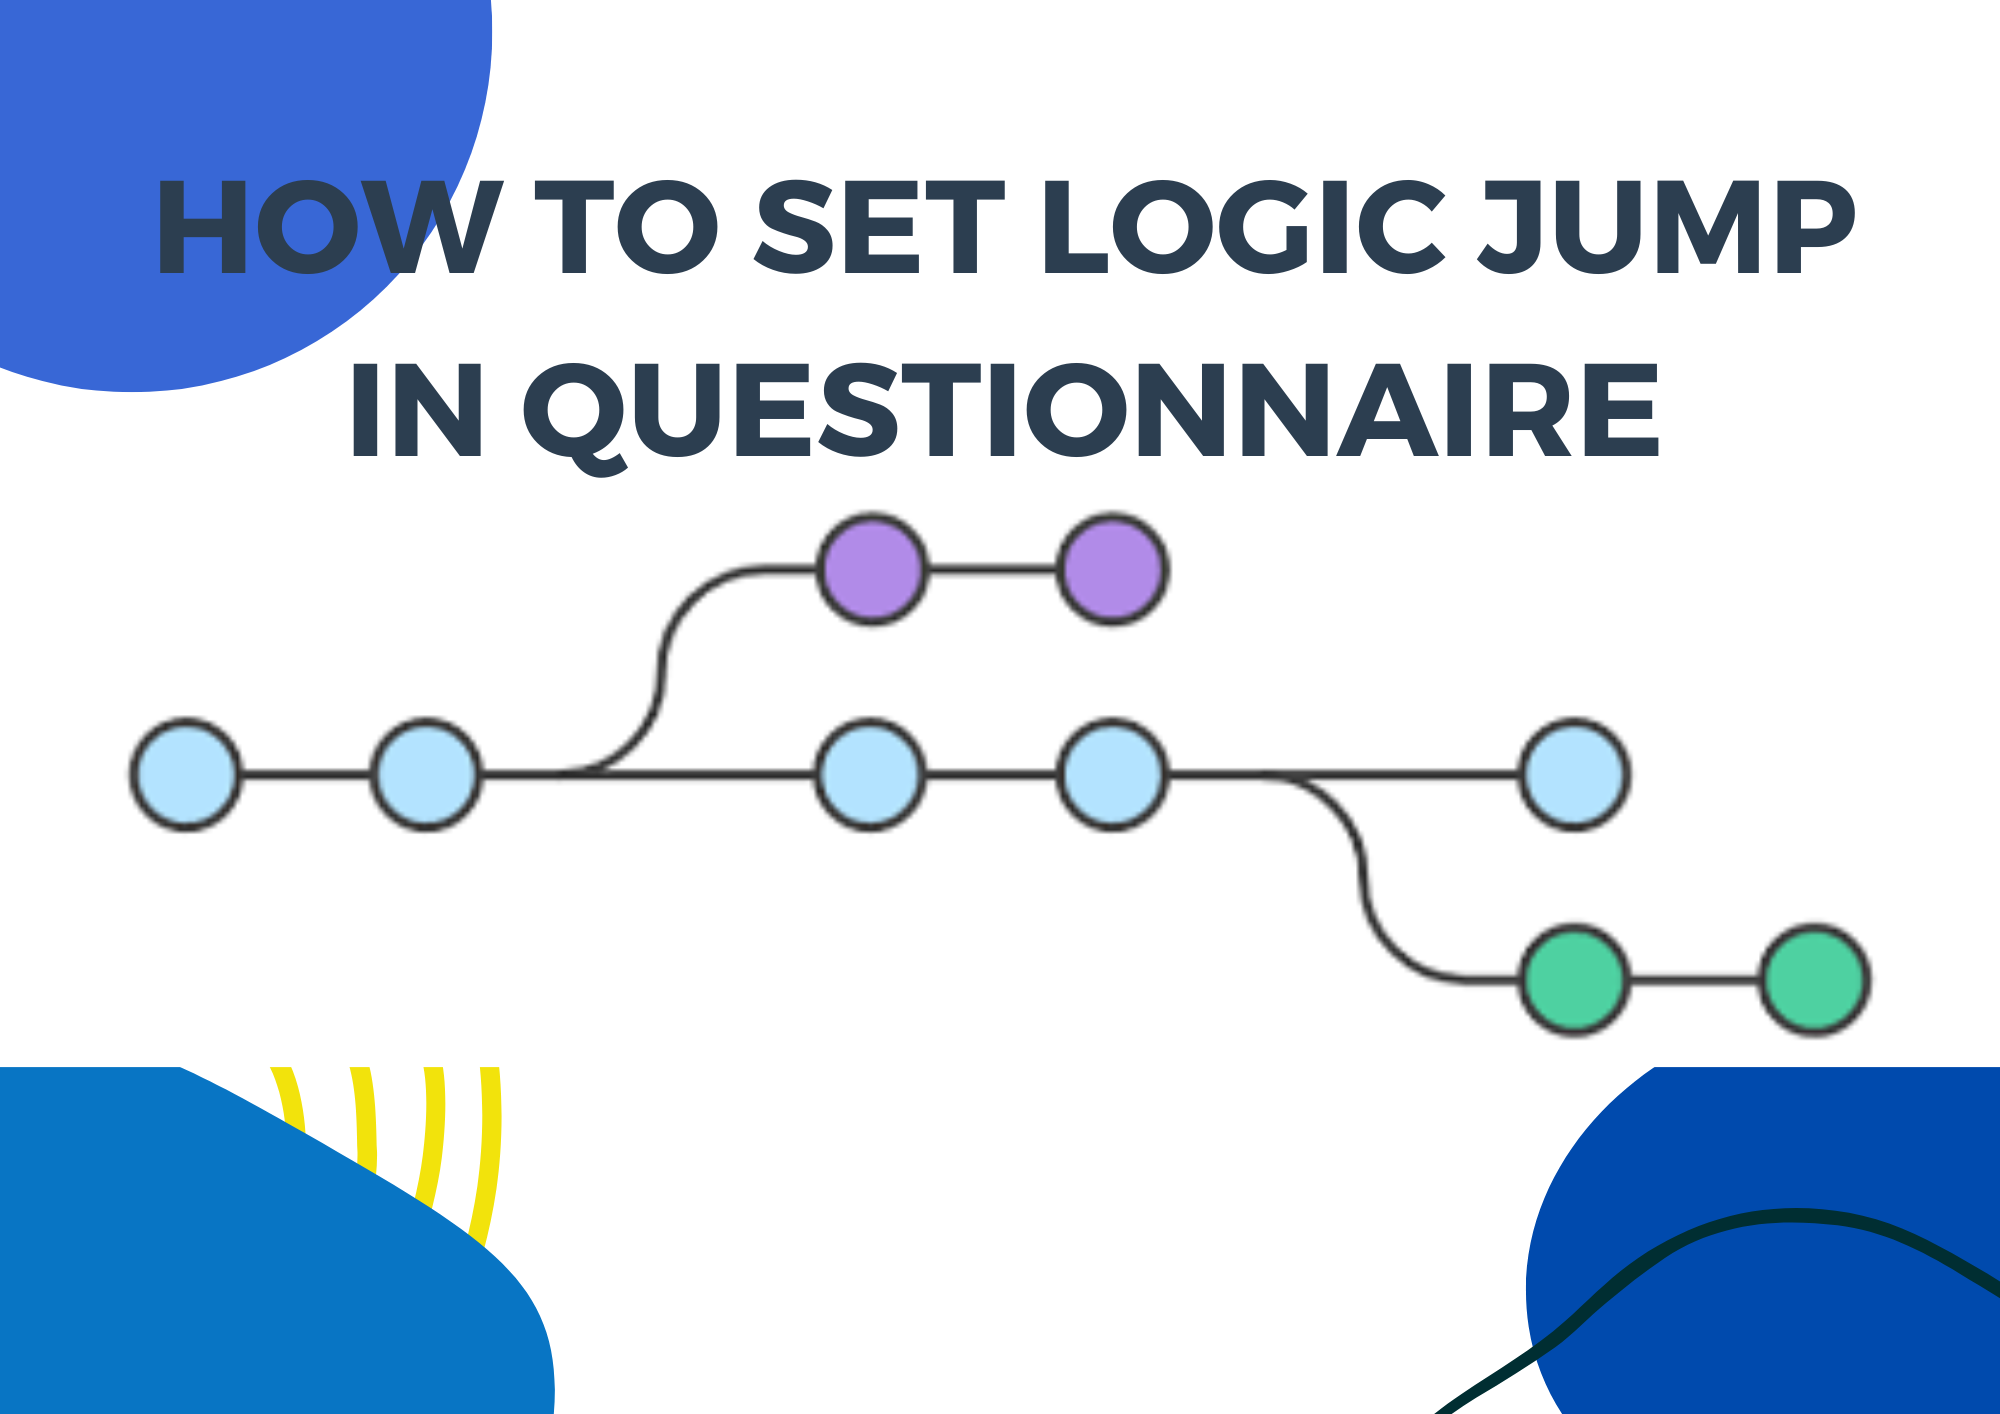 How to setting logic jump for the question